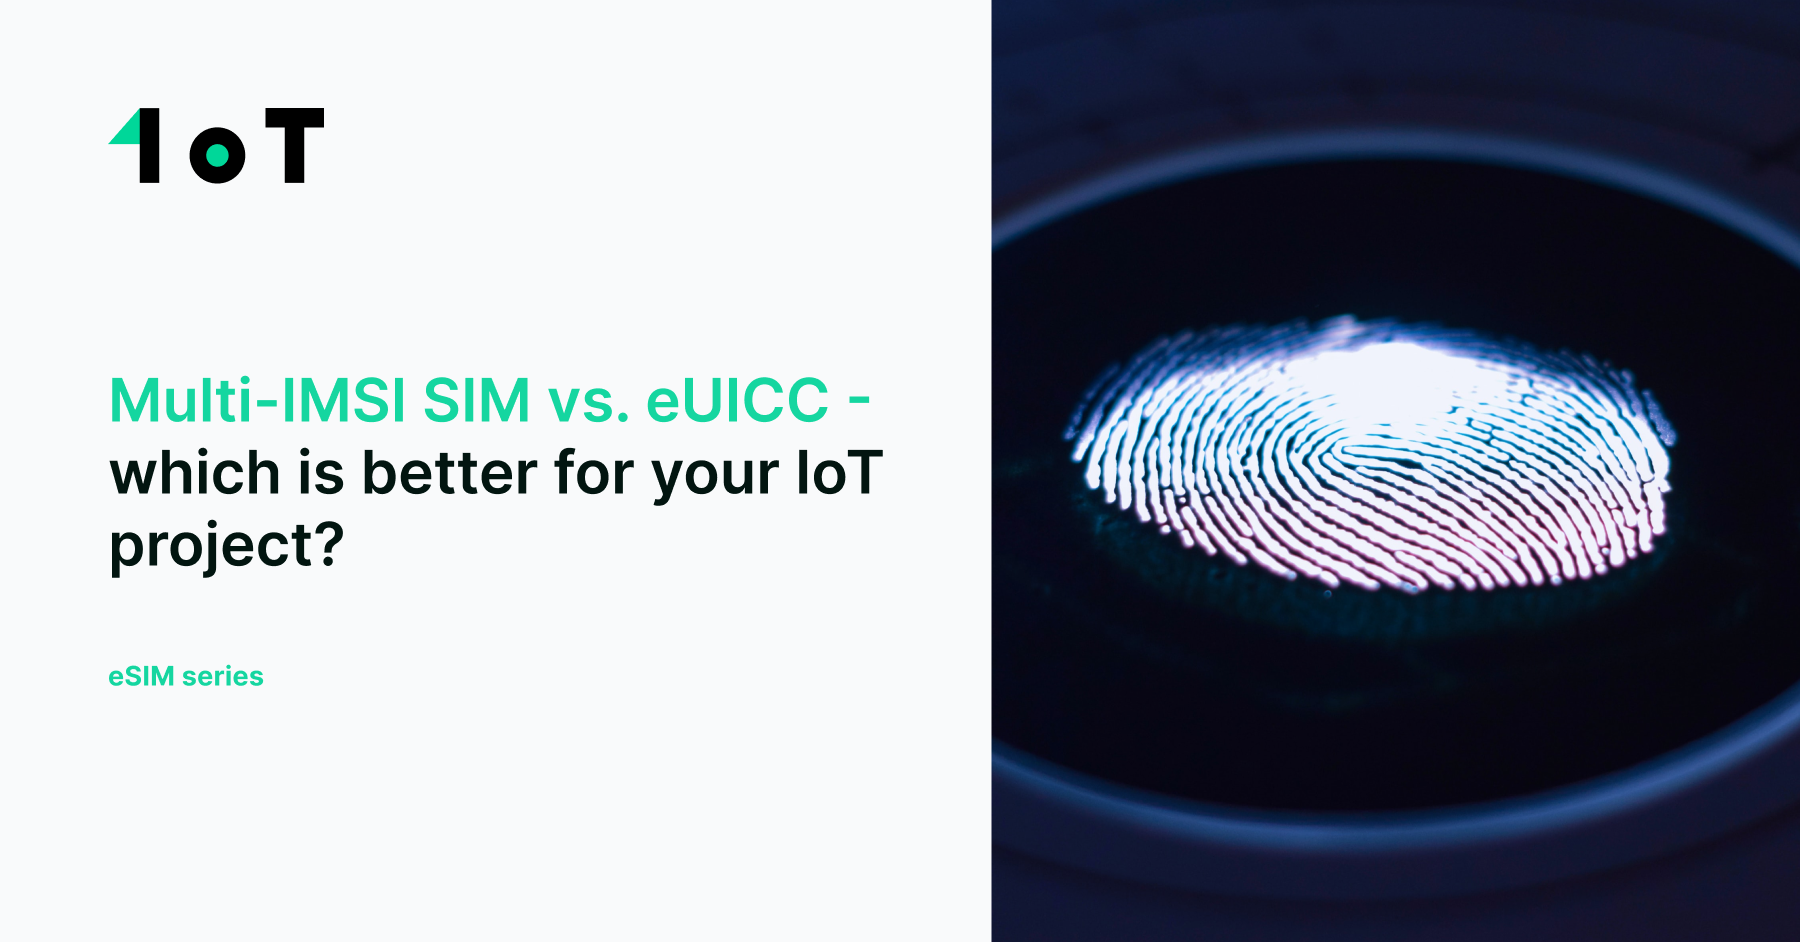 Article cover image for Multi-IMSI SIM vs. eUICC - which one is better for your IoT project?